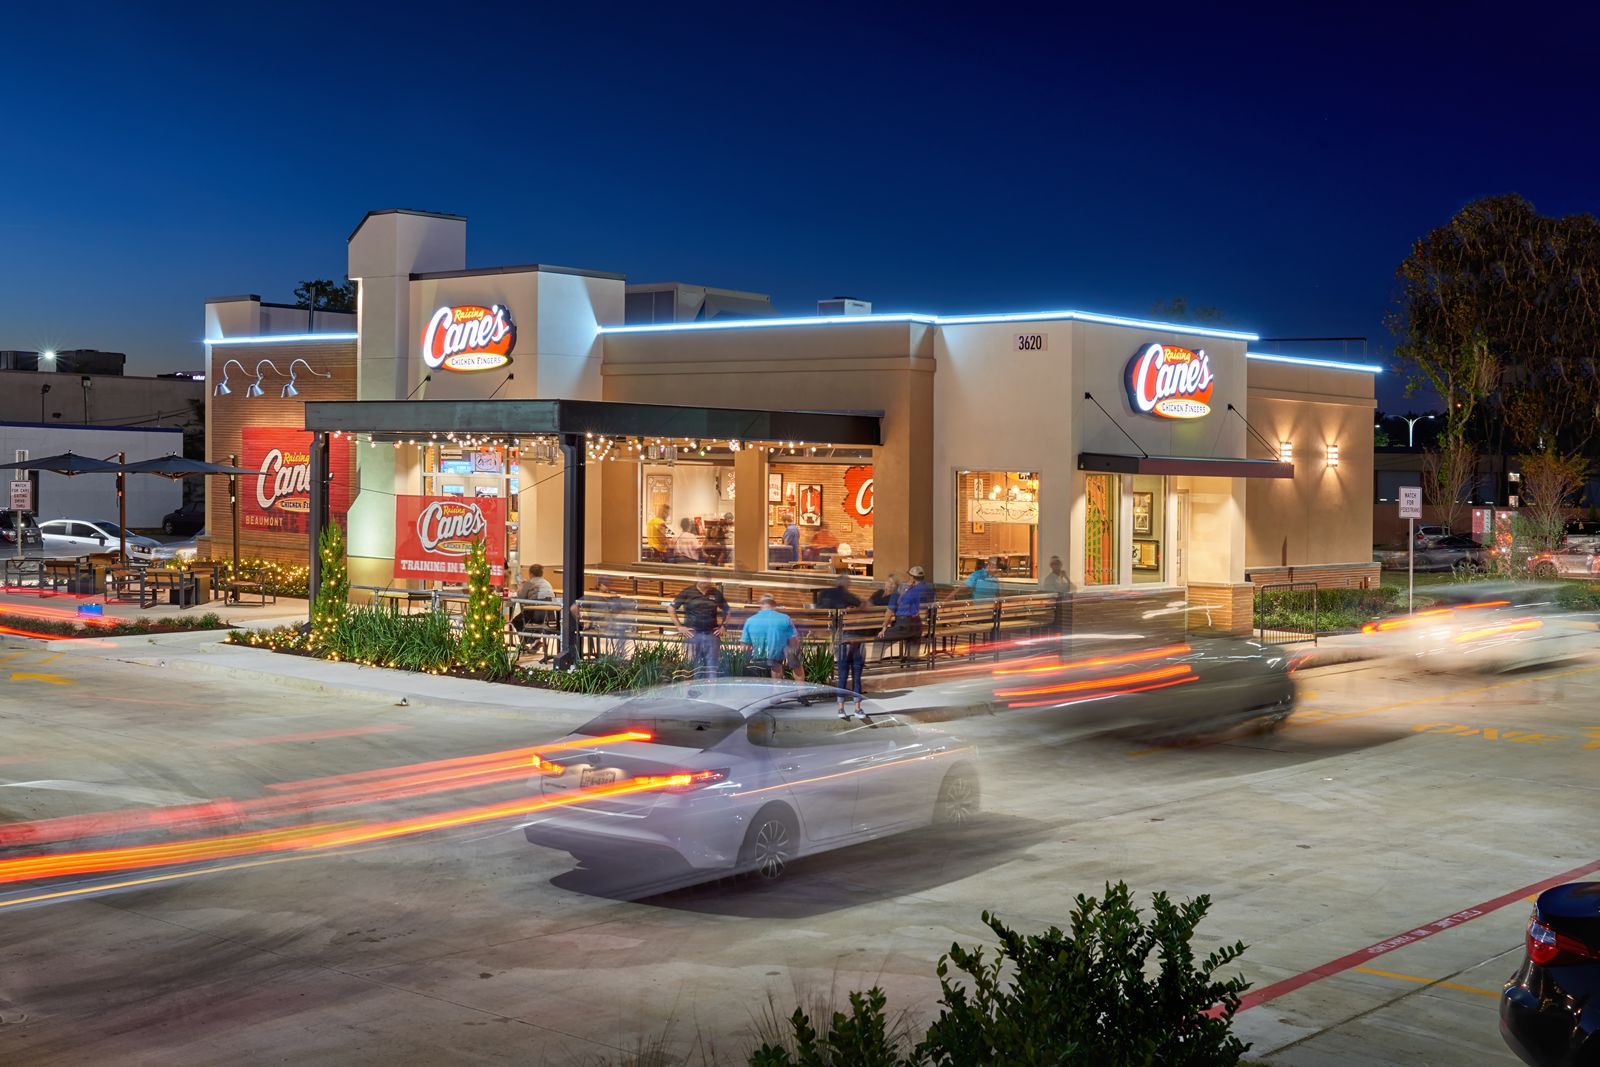 Kicking Off Massive Growth in 2022, Raising Cane's Celebrates Opening of 600th Restaurant